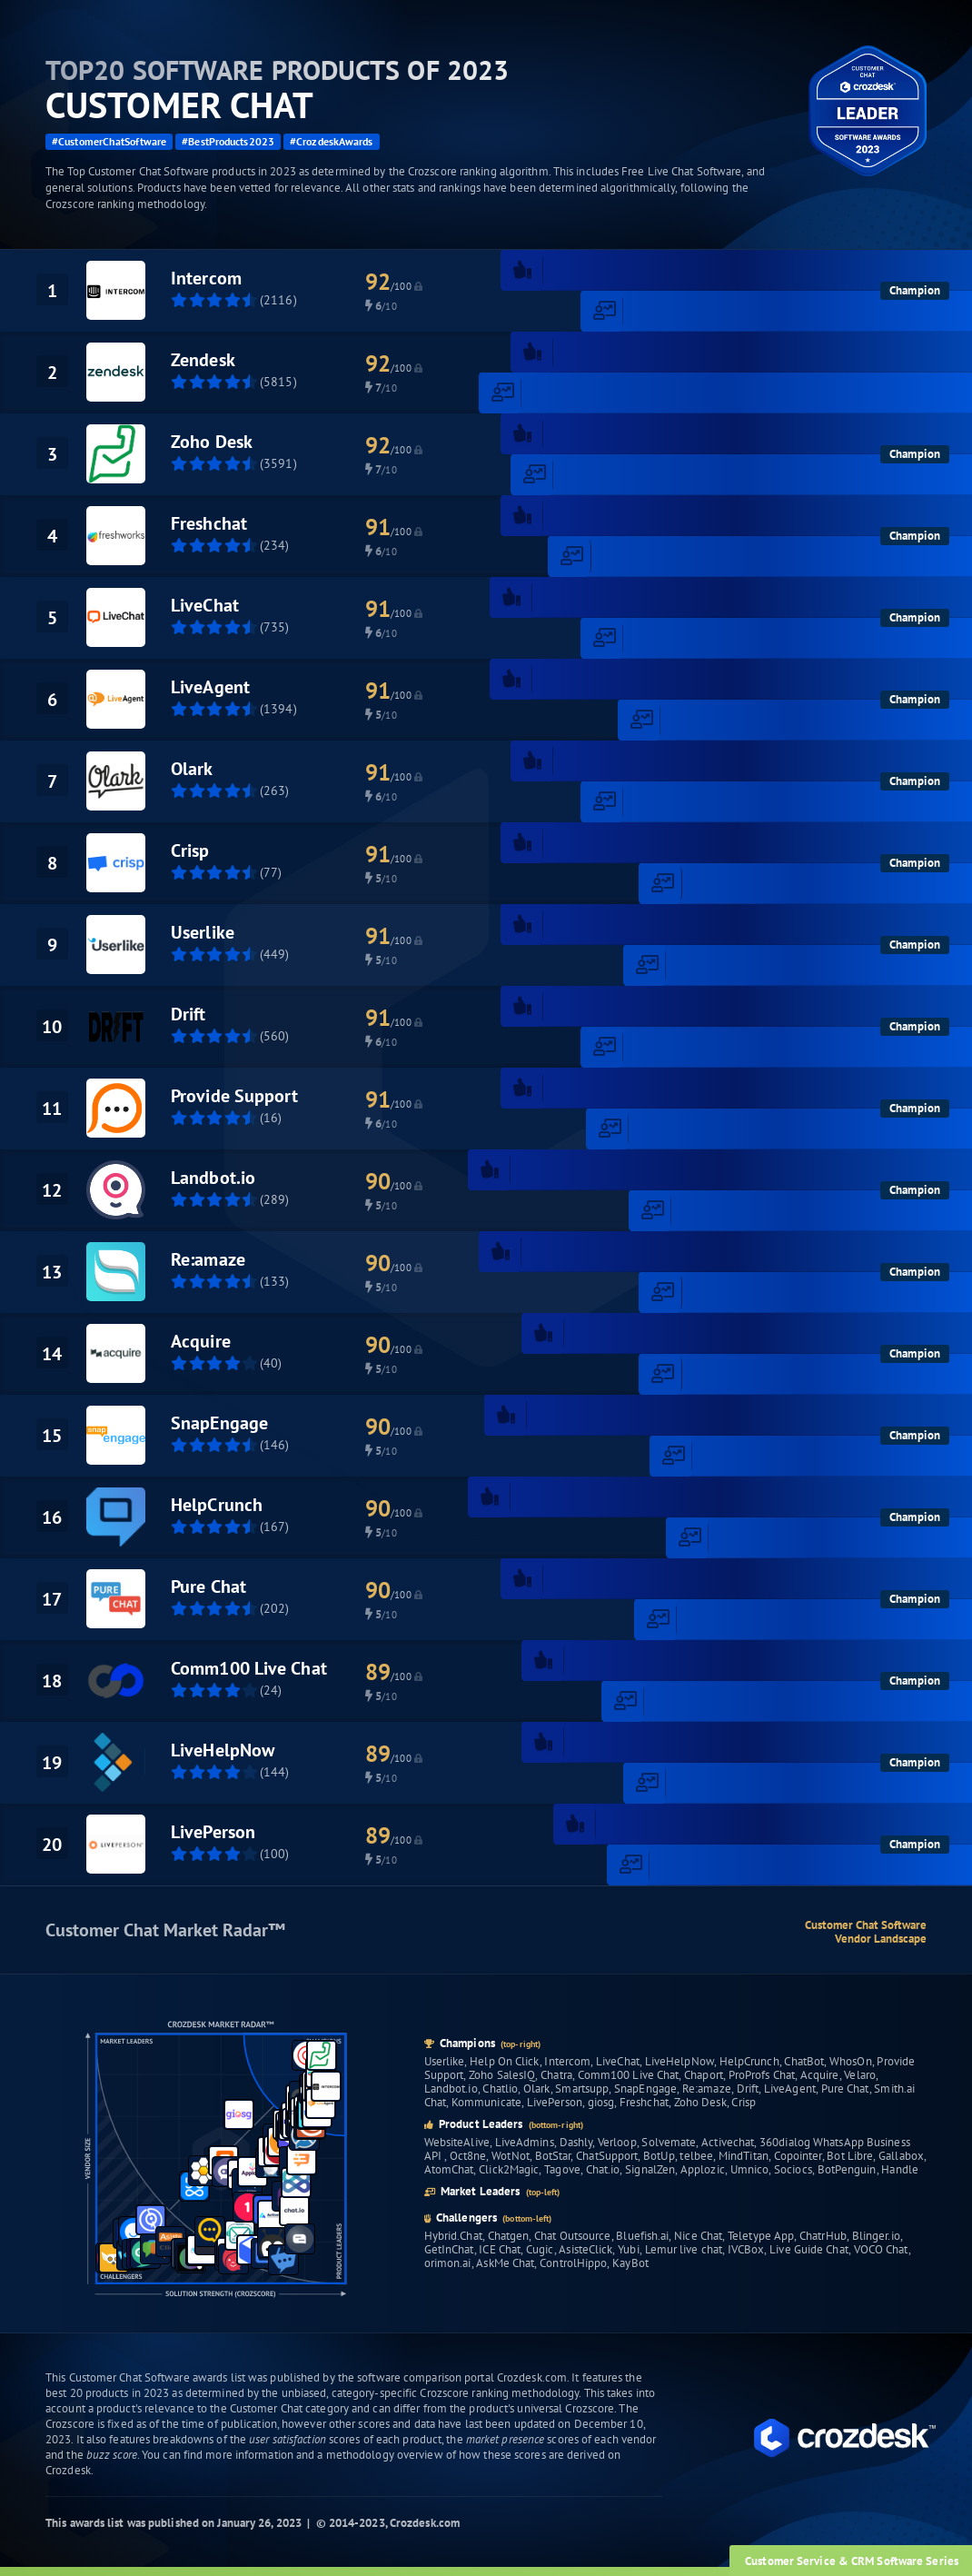 Top 20 Customer Chat Software of 2023 Infographic